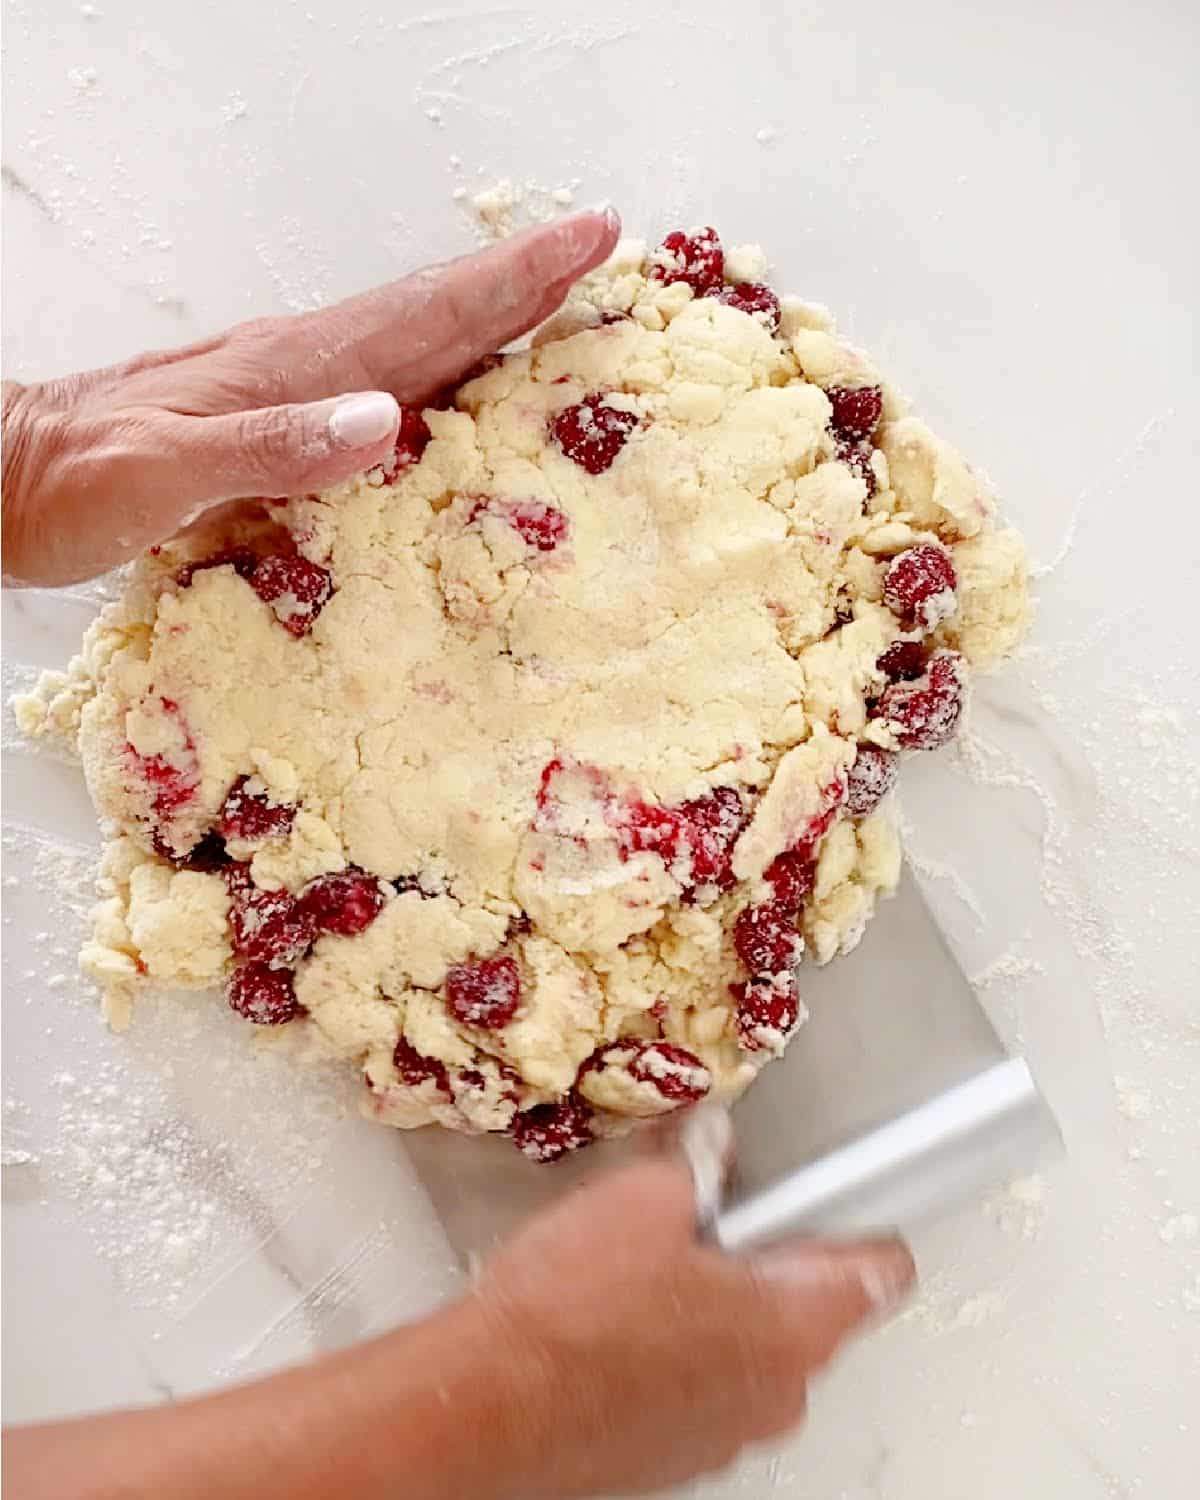 Forming raspberry scone dough disc with a dough scraper on a white marbled surface.